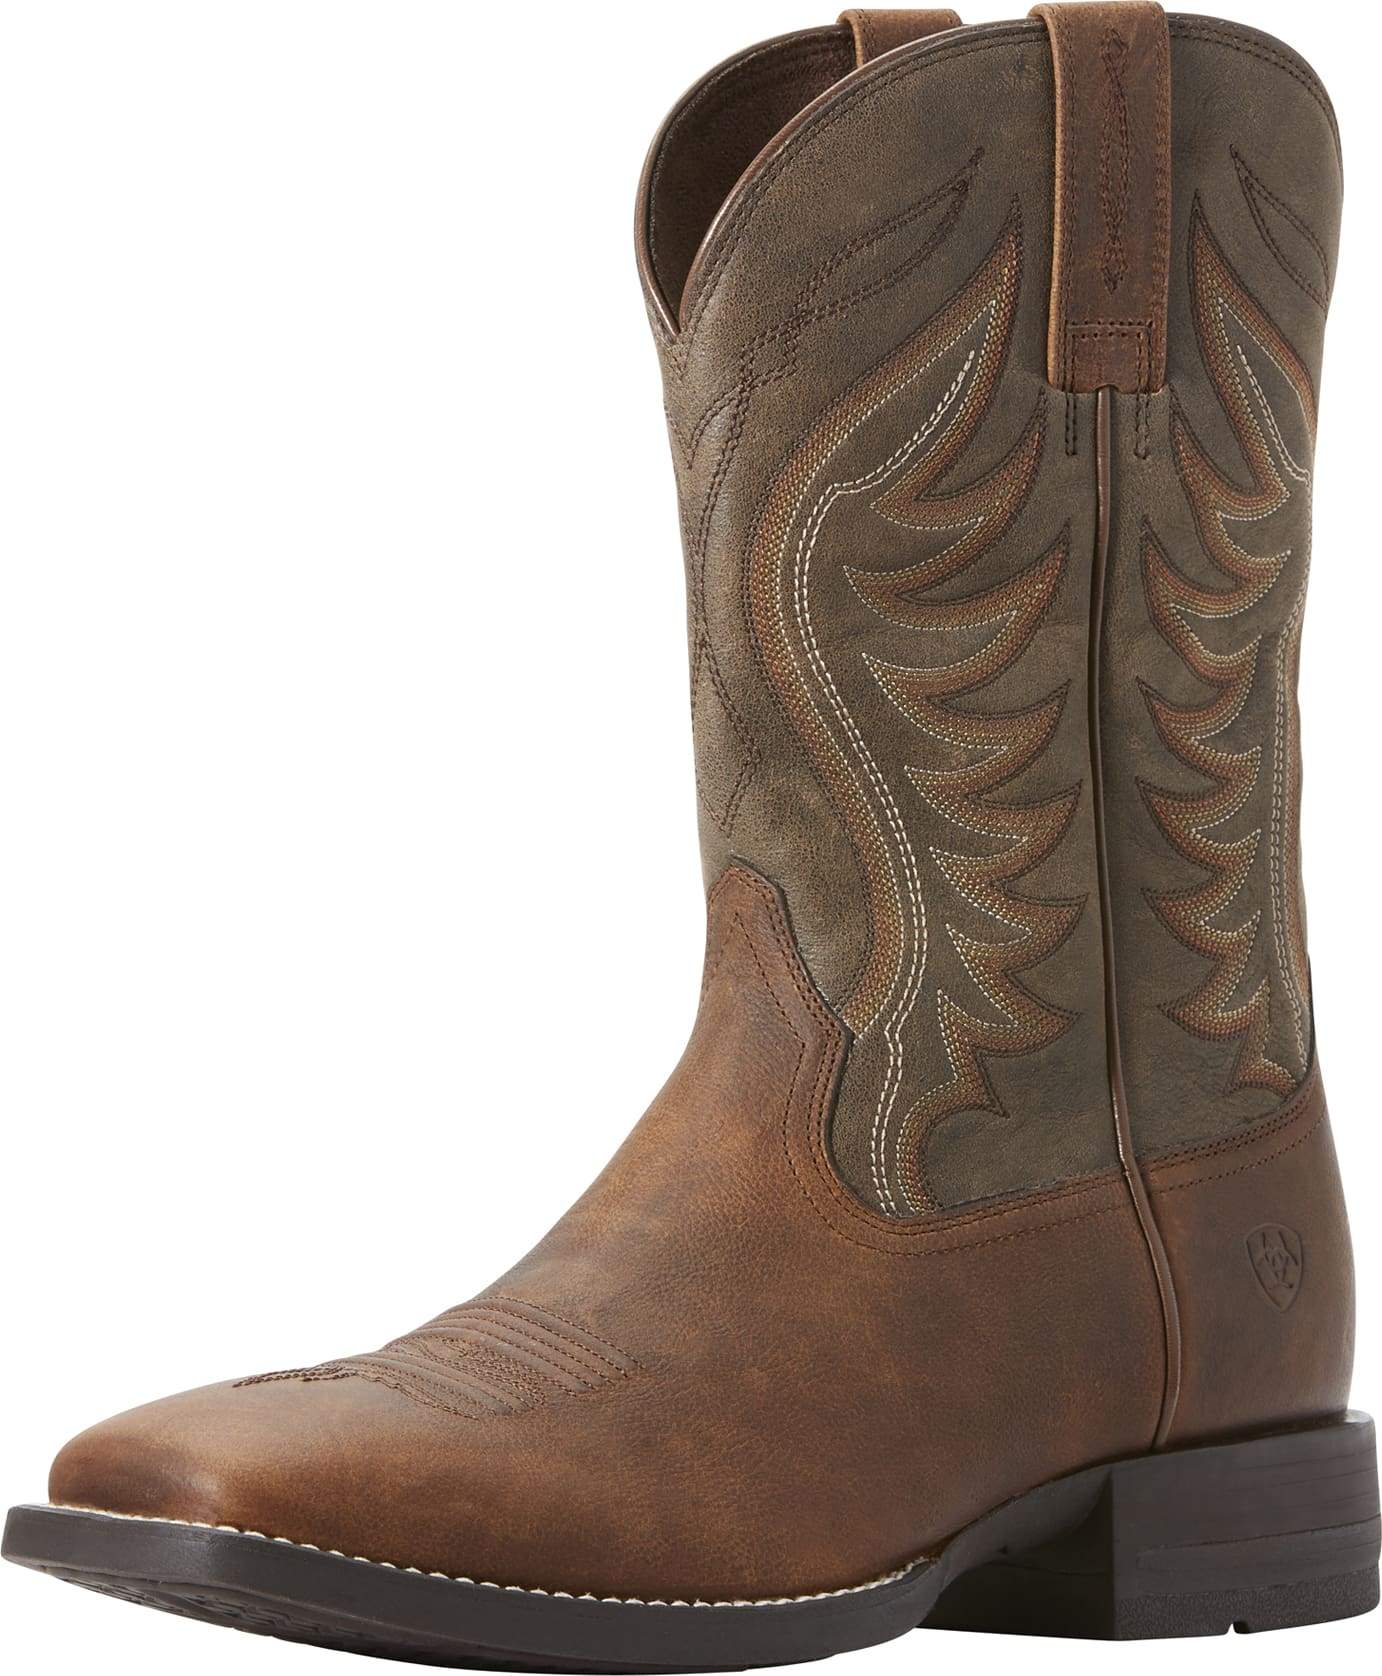 ariat boots outlet near me